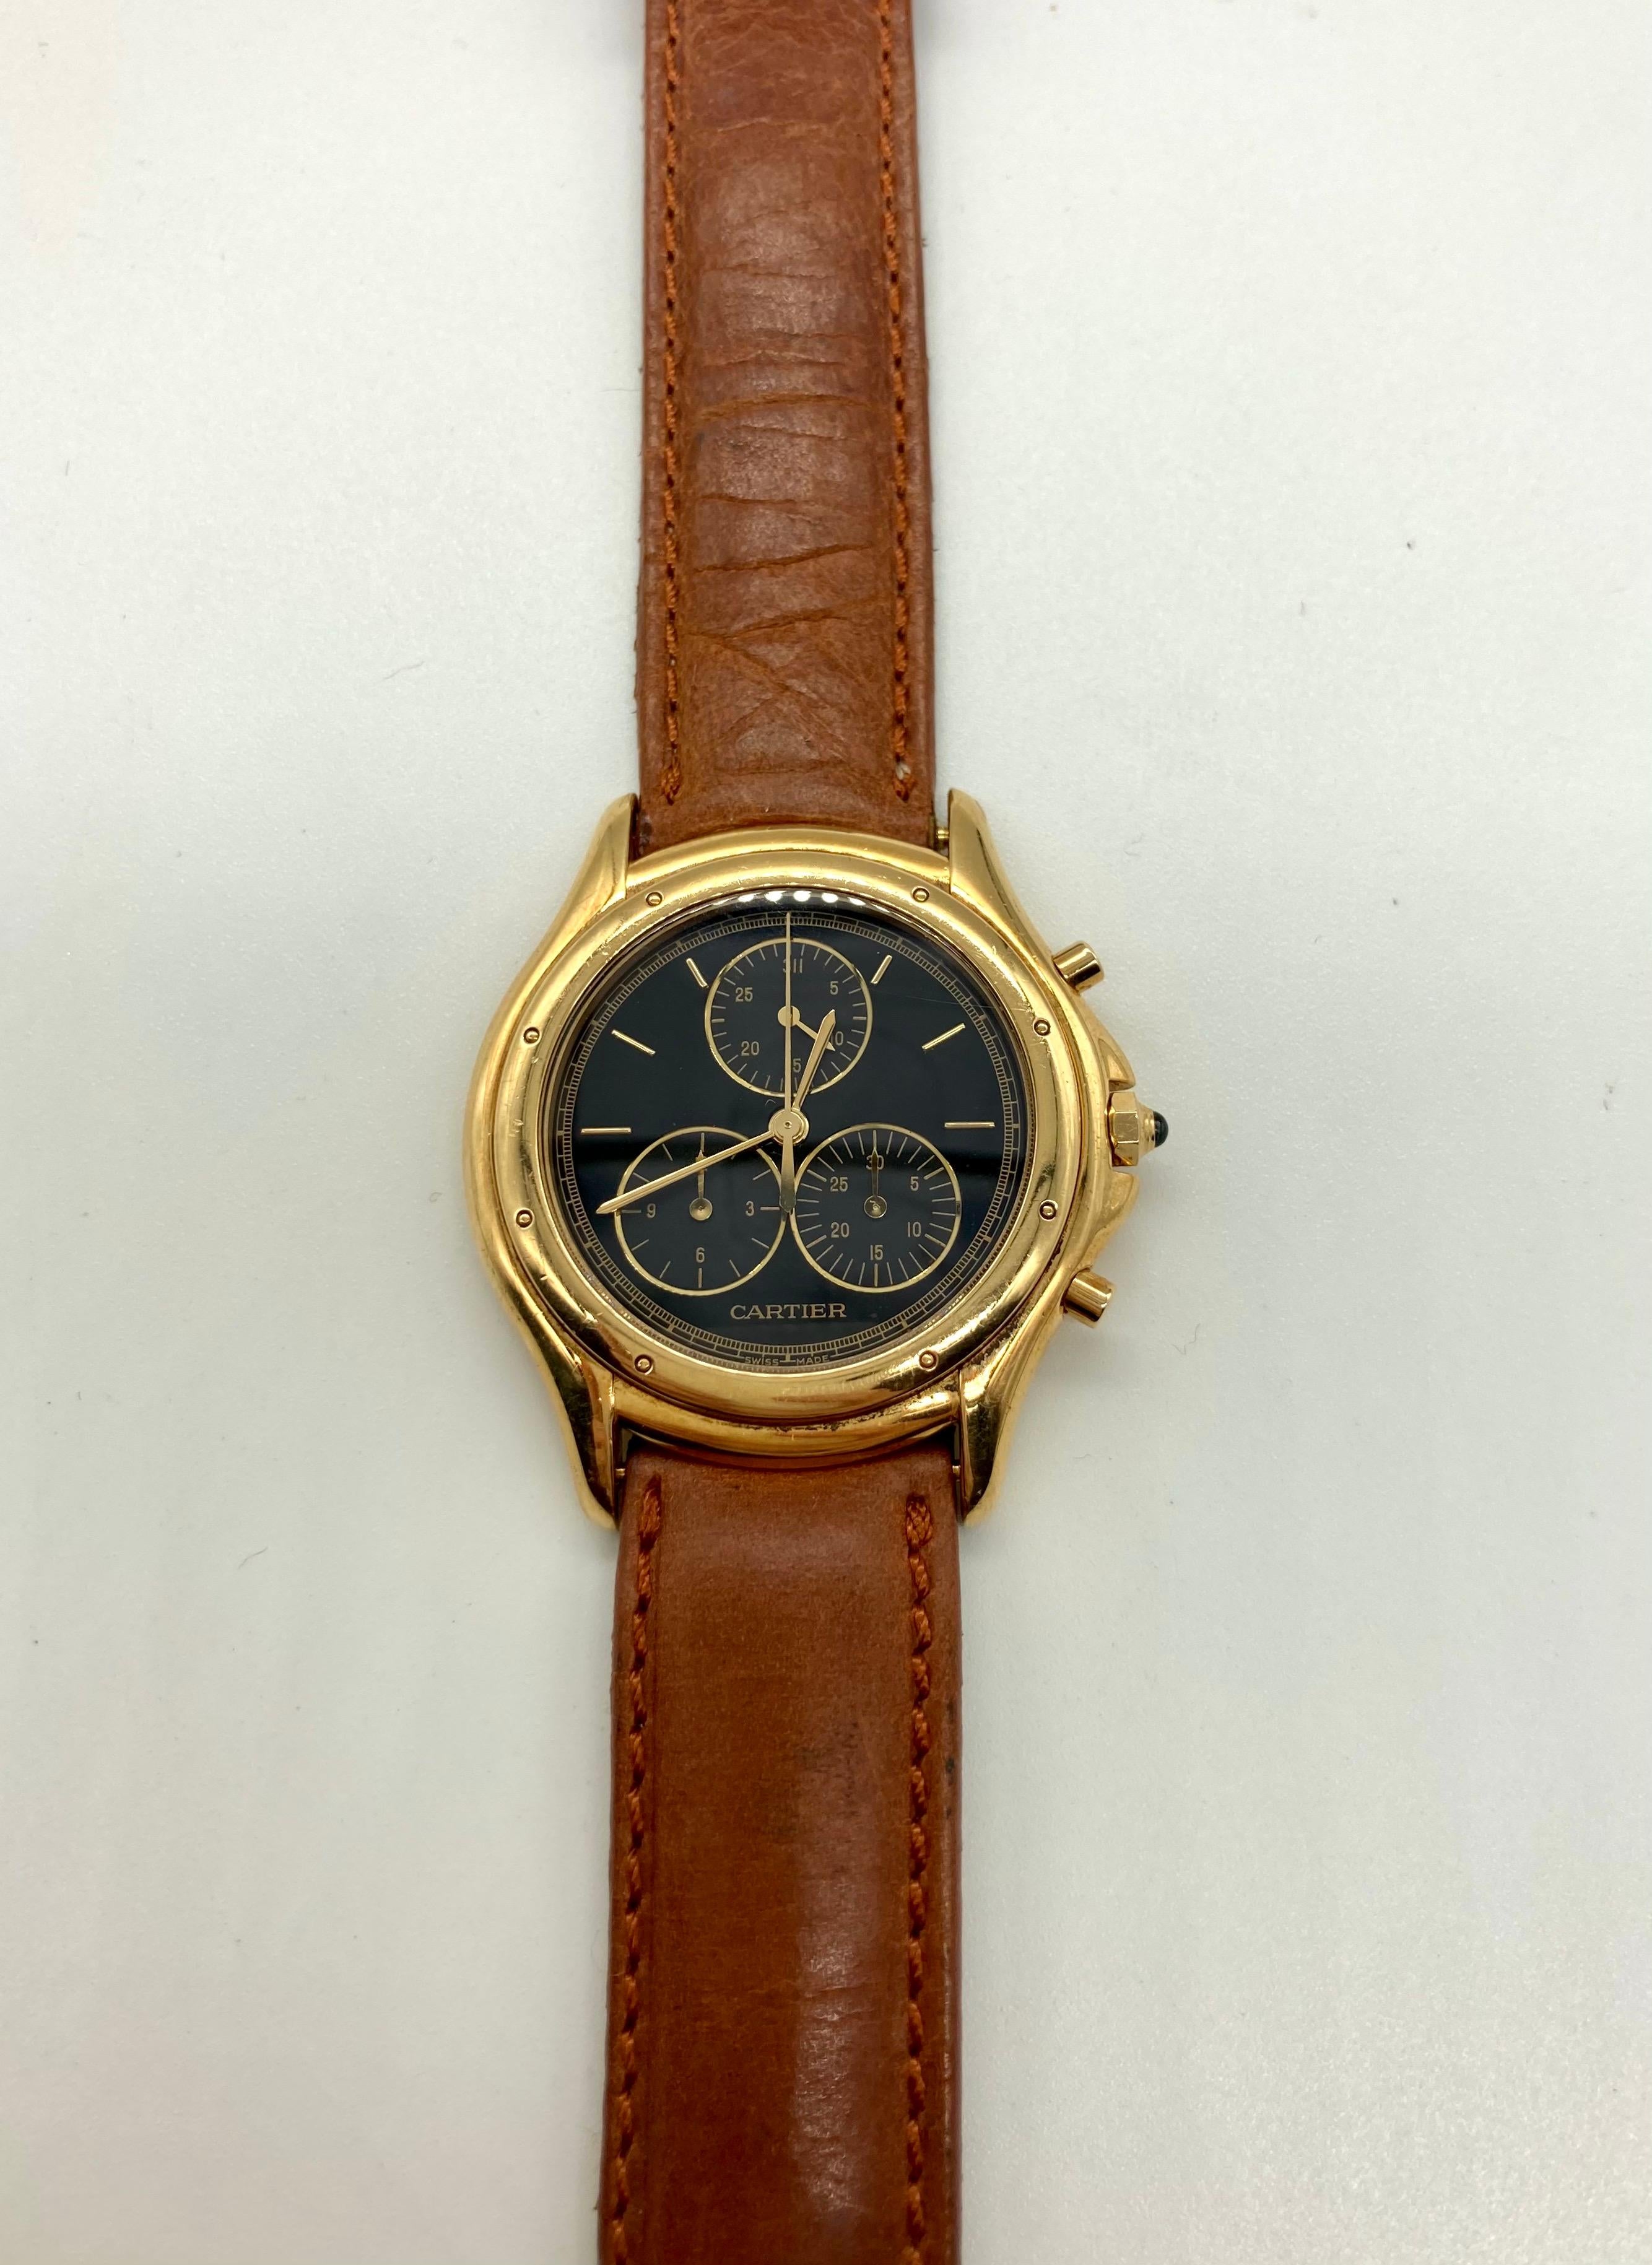 A chic Cartier quartz chronograph watch in 18 karat yellow gold, with a leather strap. Made in Switzerland, circa 1980.